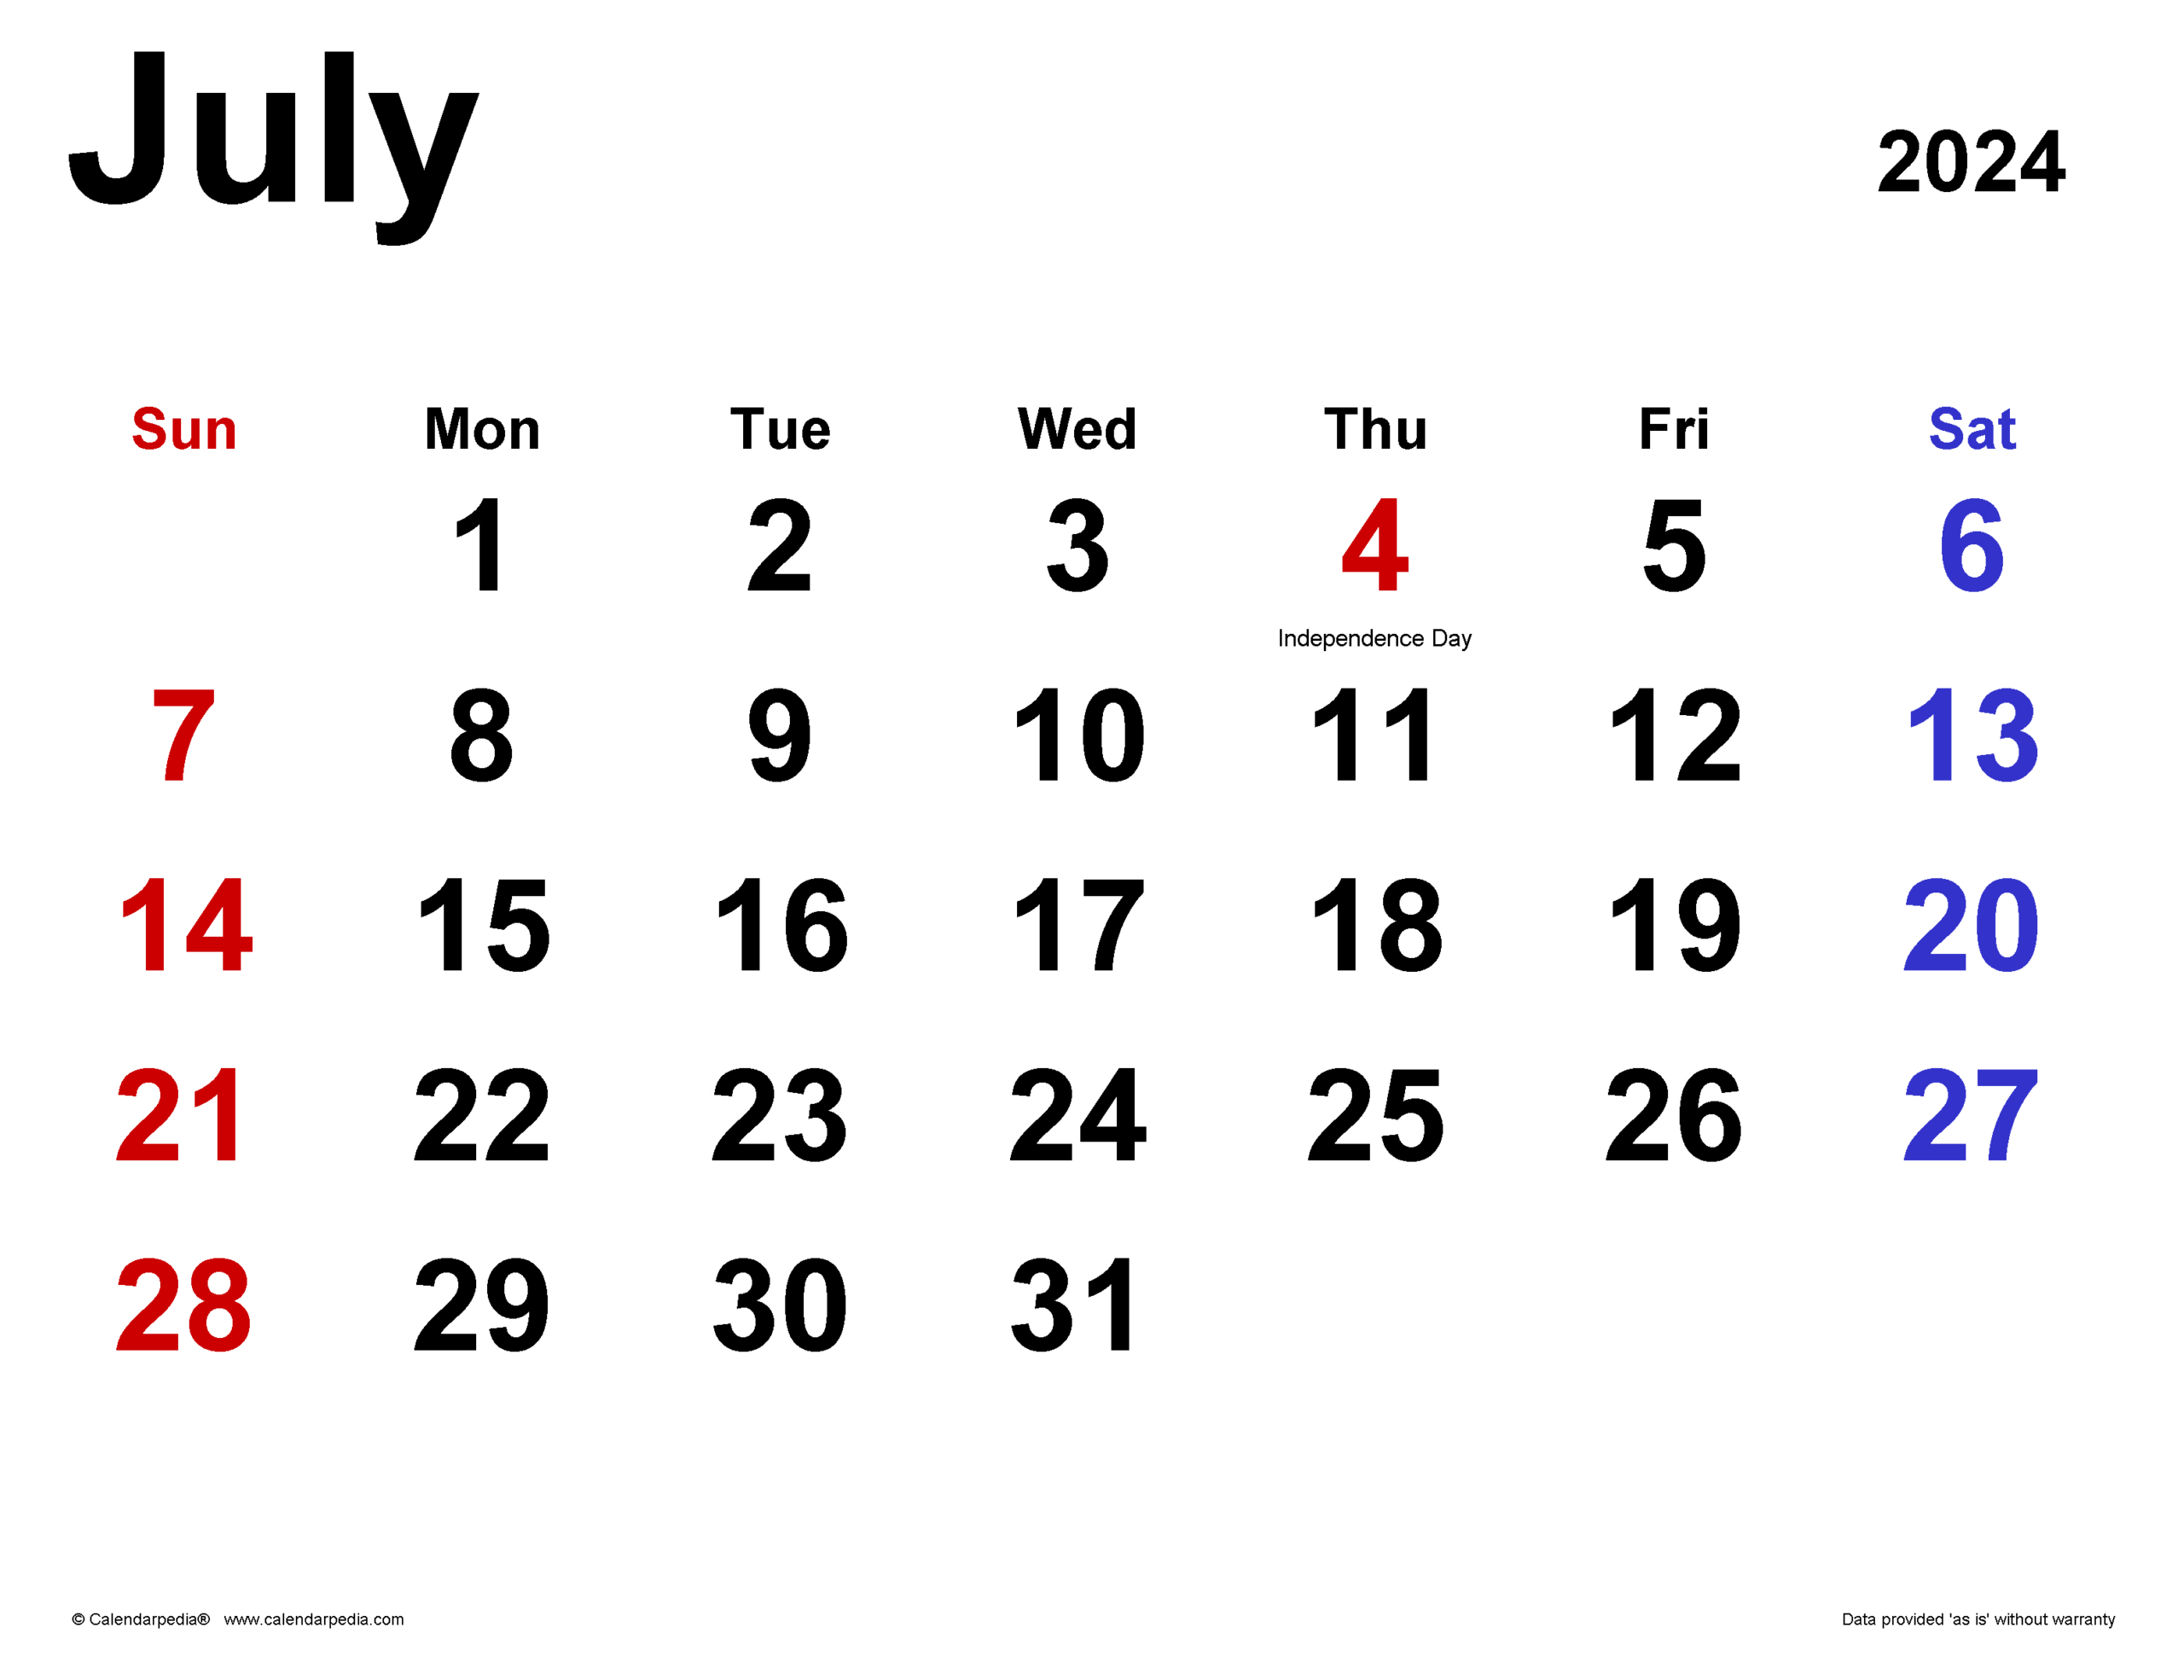 July 2024 Calendar | Templates For Word, Excel And Pdf with regard to Word Calendar July 2024